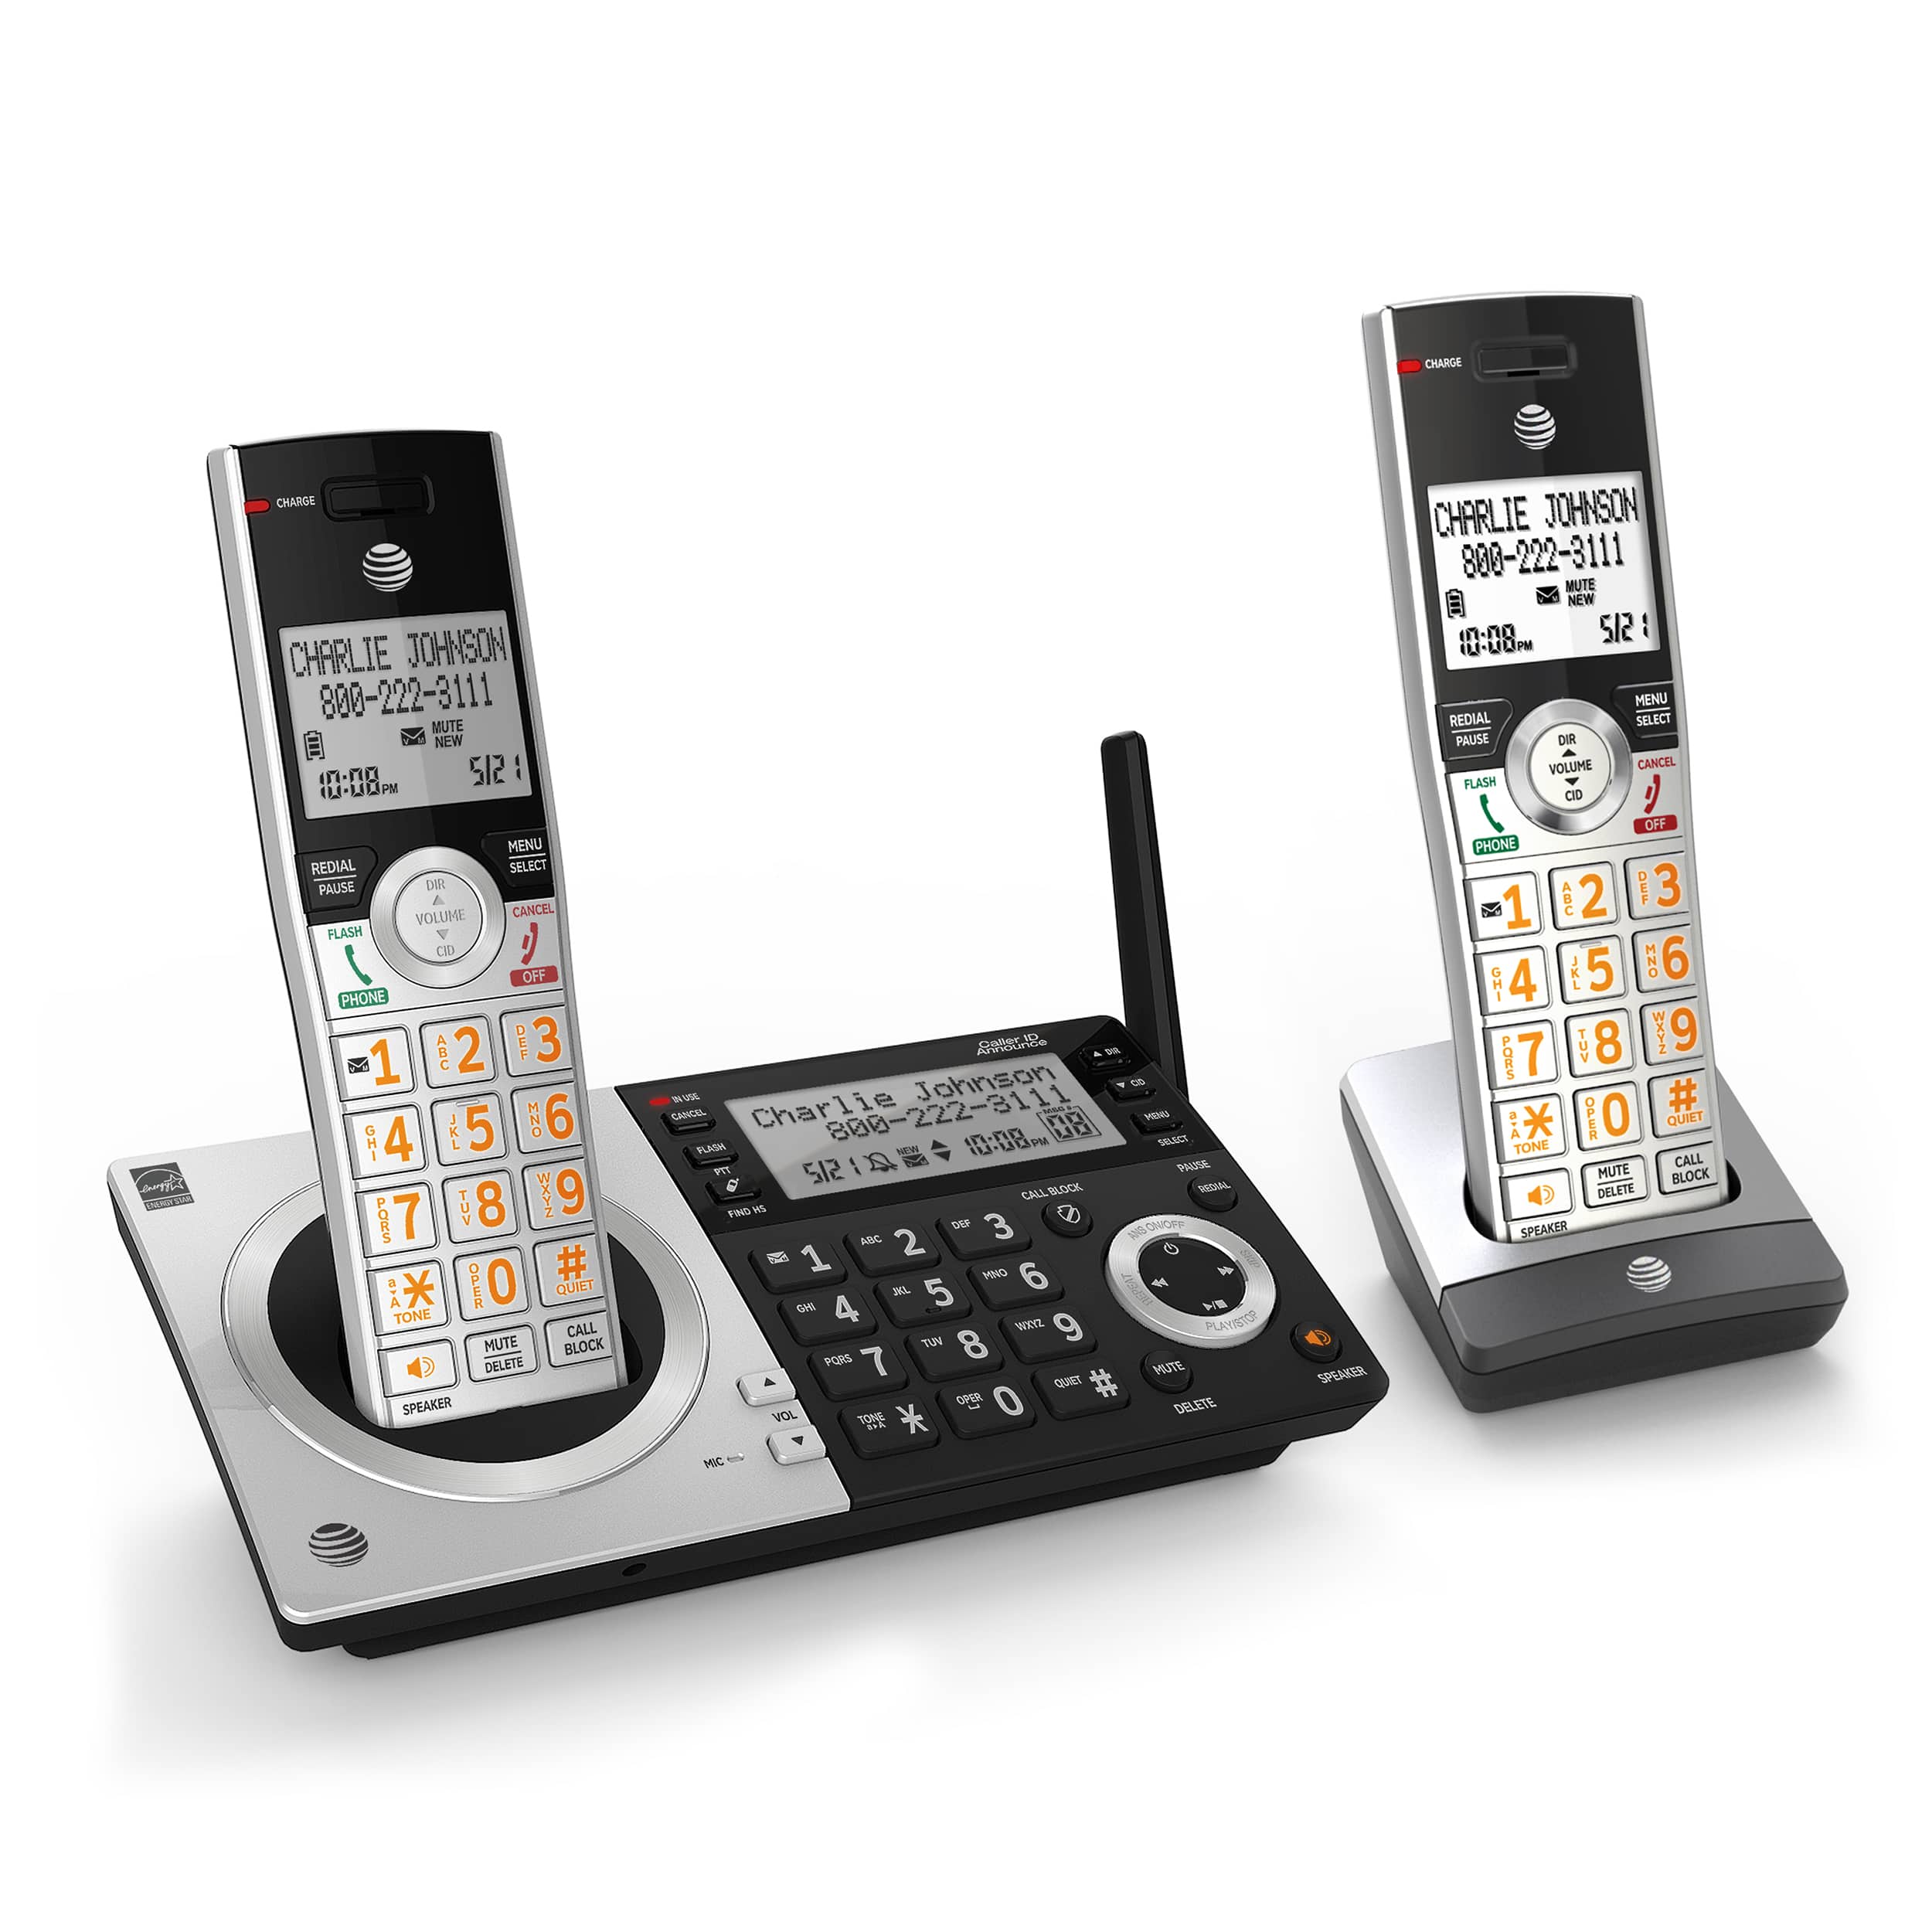 2 handset phone system with smart call blocker - view 2